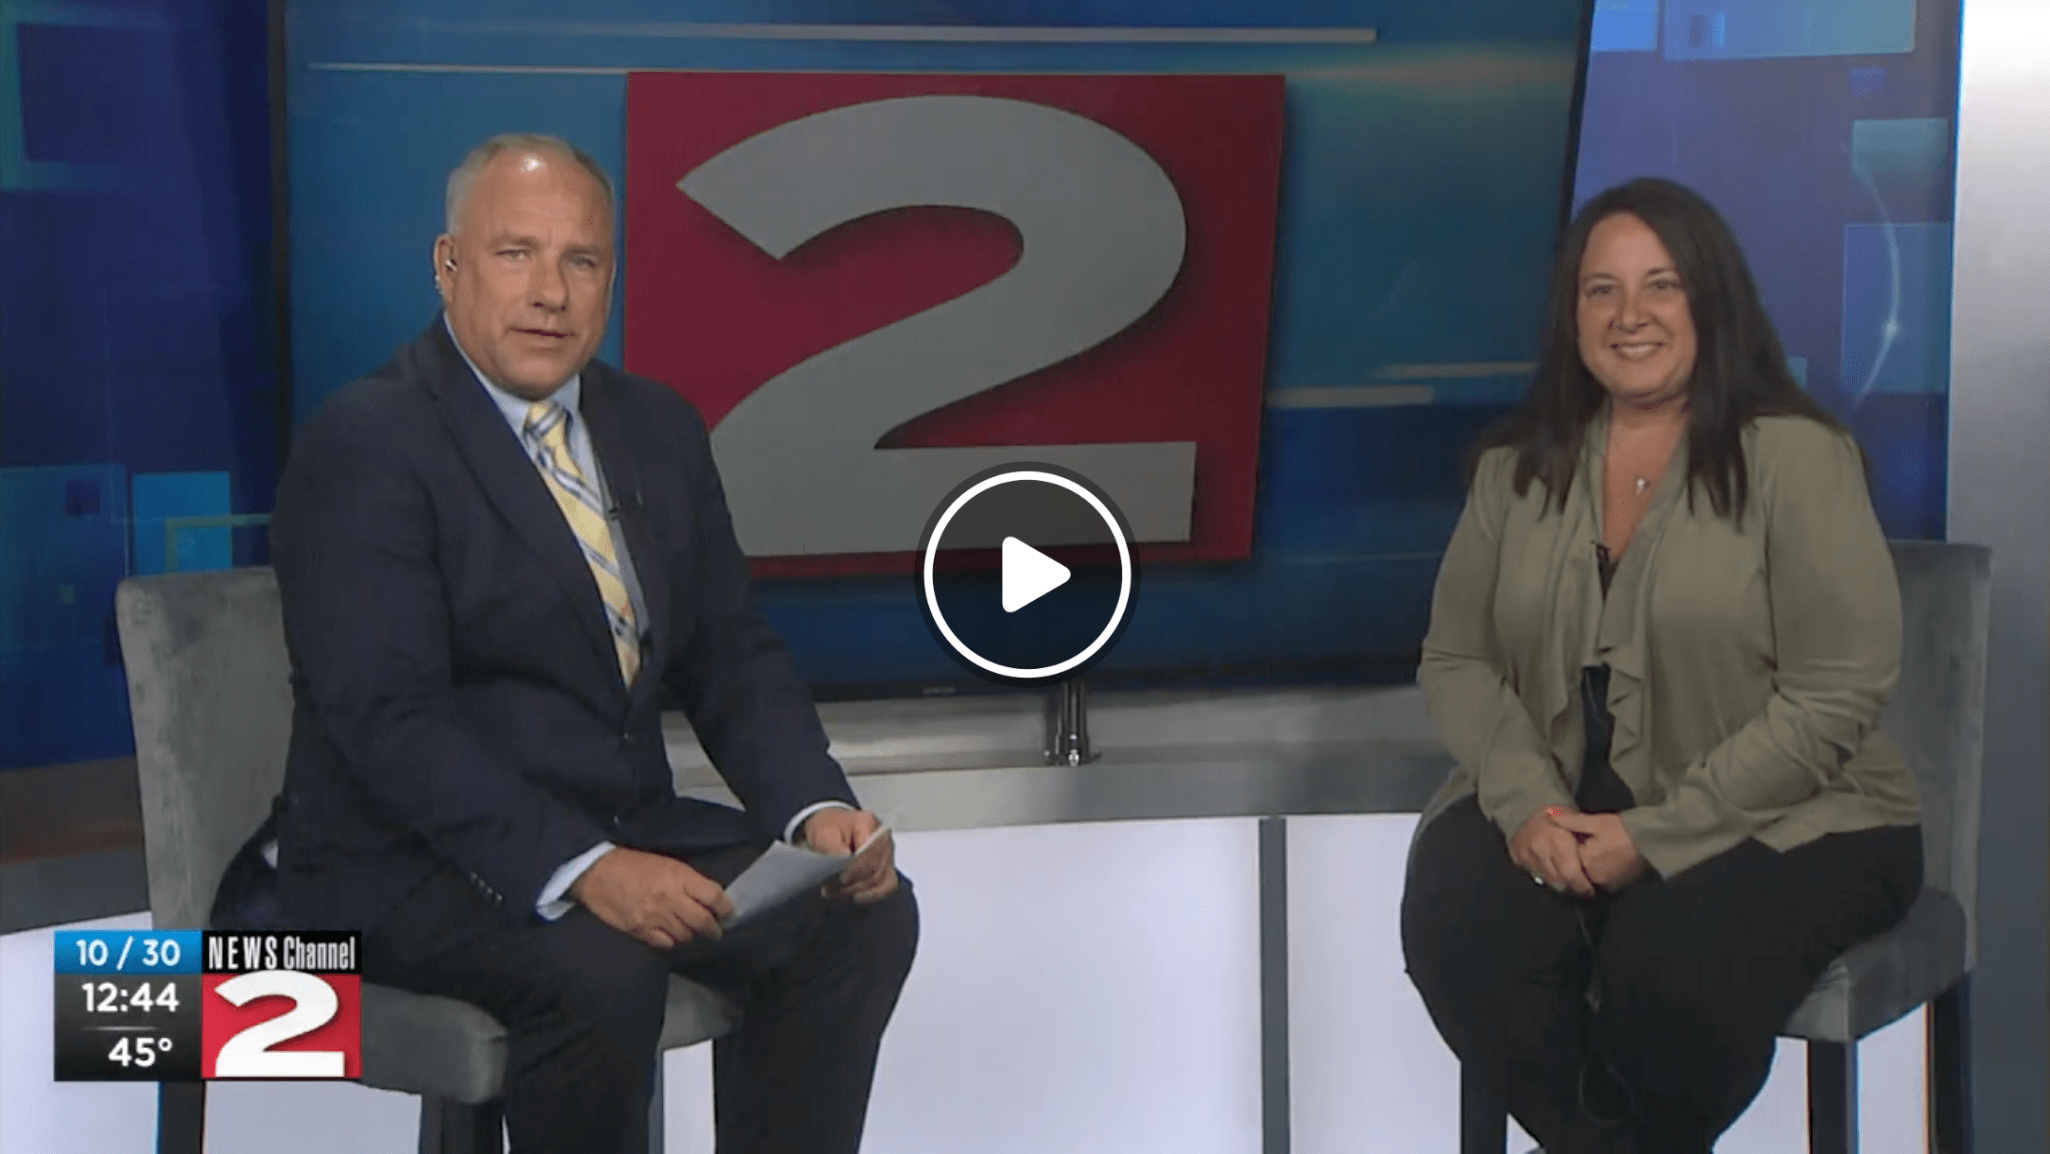 Gina Ciaccia discusses the Abraham House 25 year celebration event